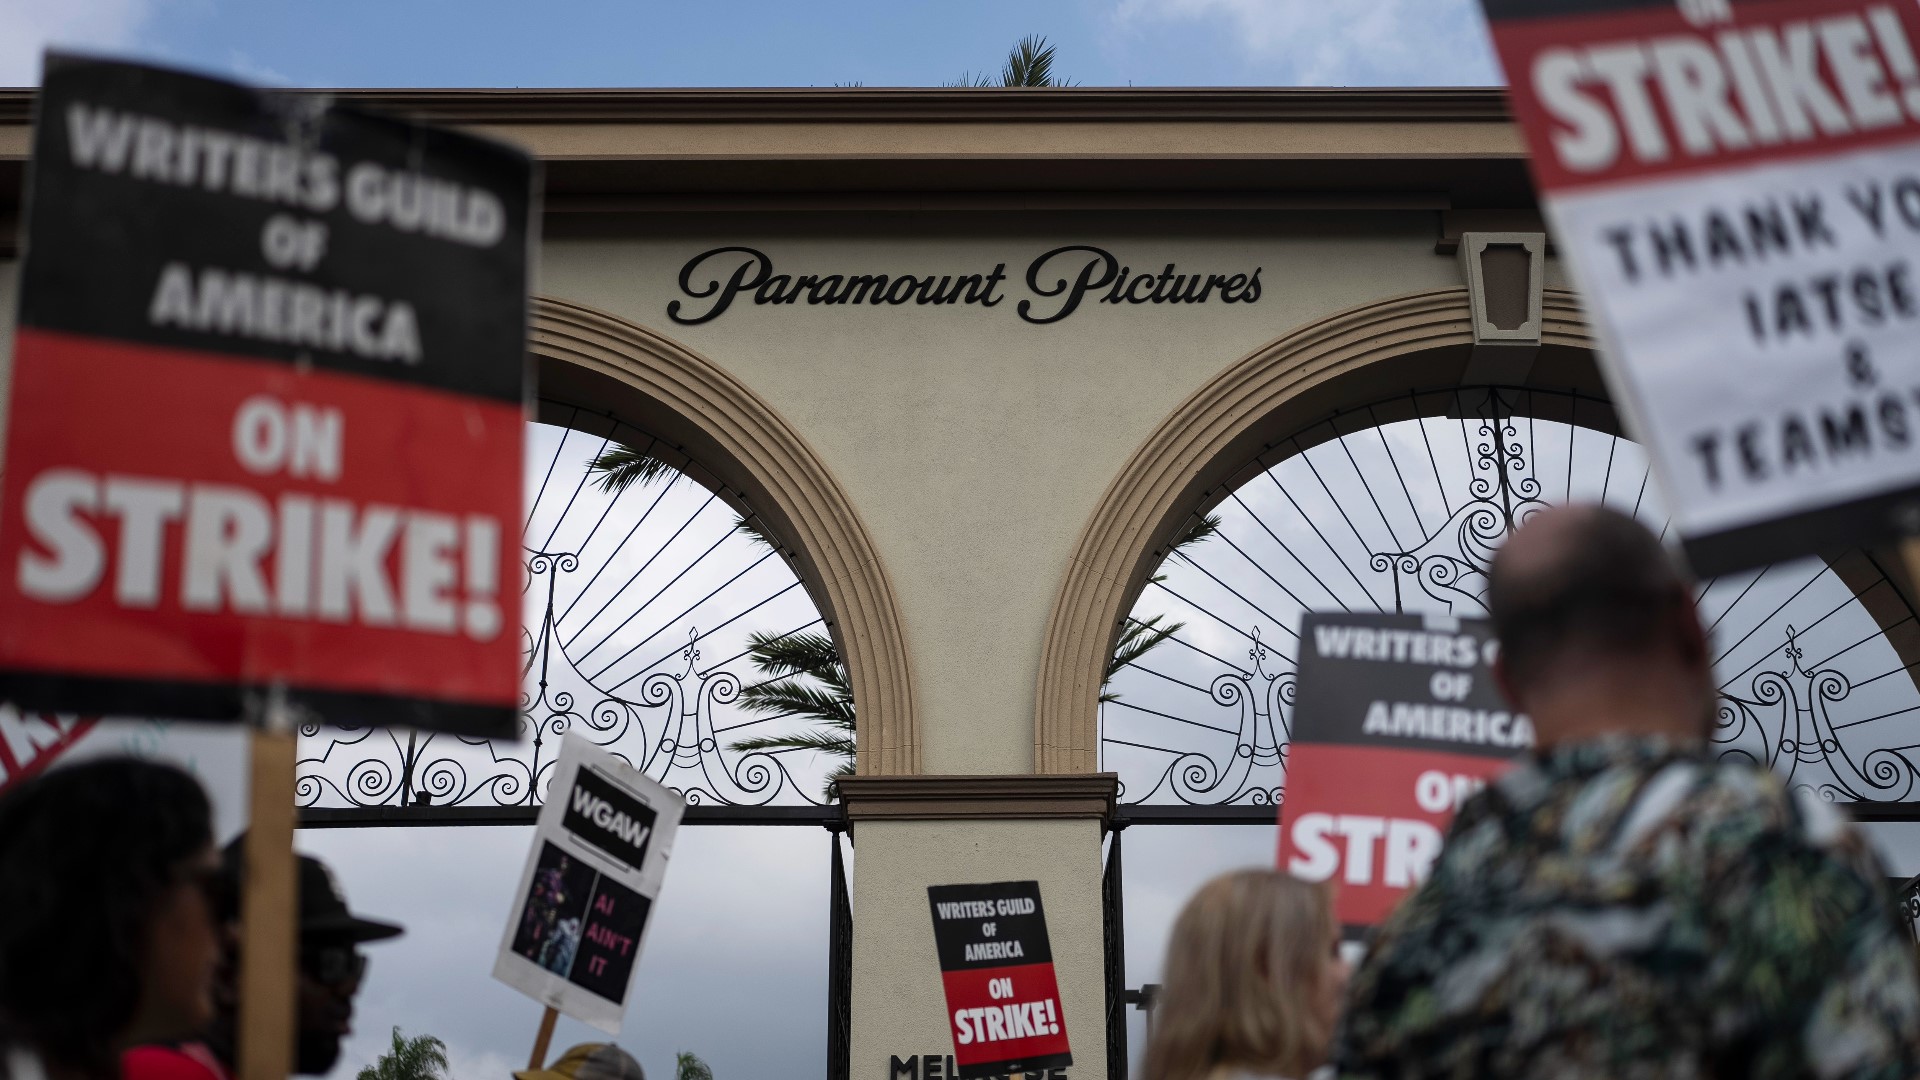 A tentative deal has been reached to end the Hollywood writers' strike, though no deal is yet in the works for the striking actors.